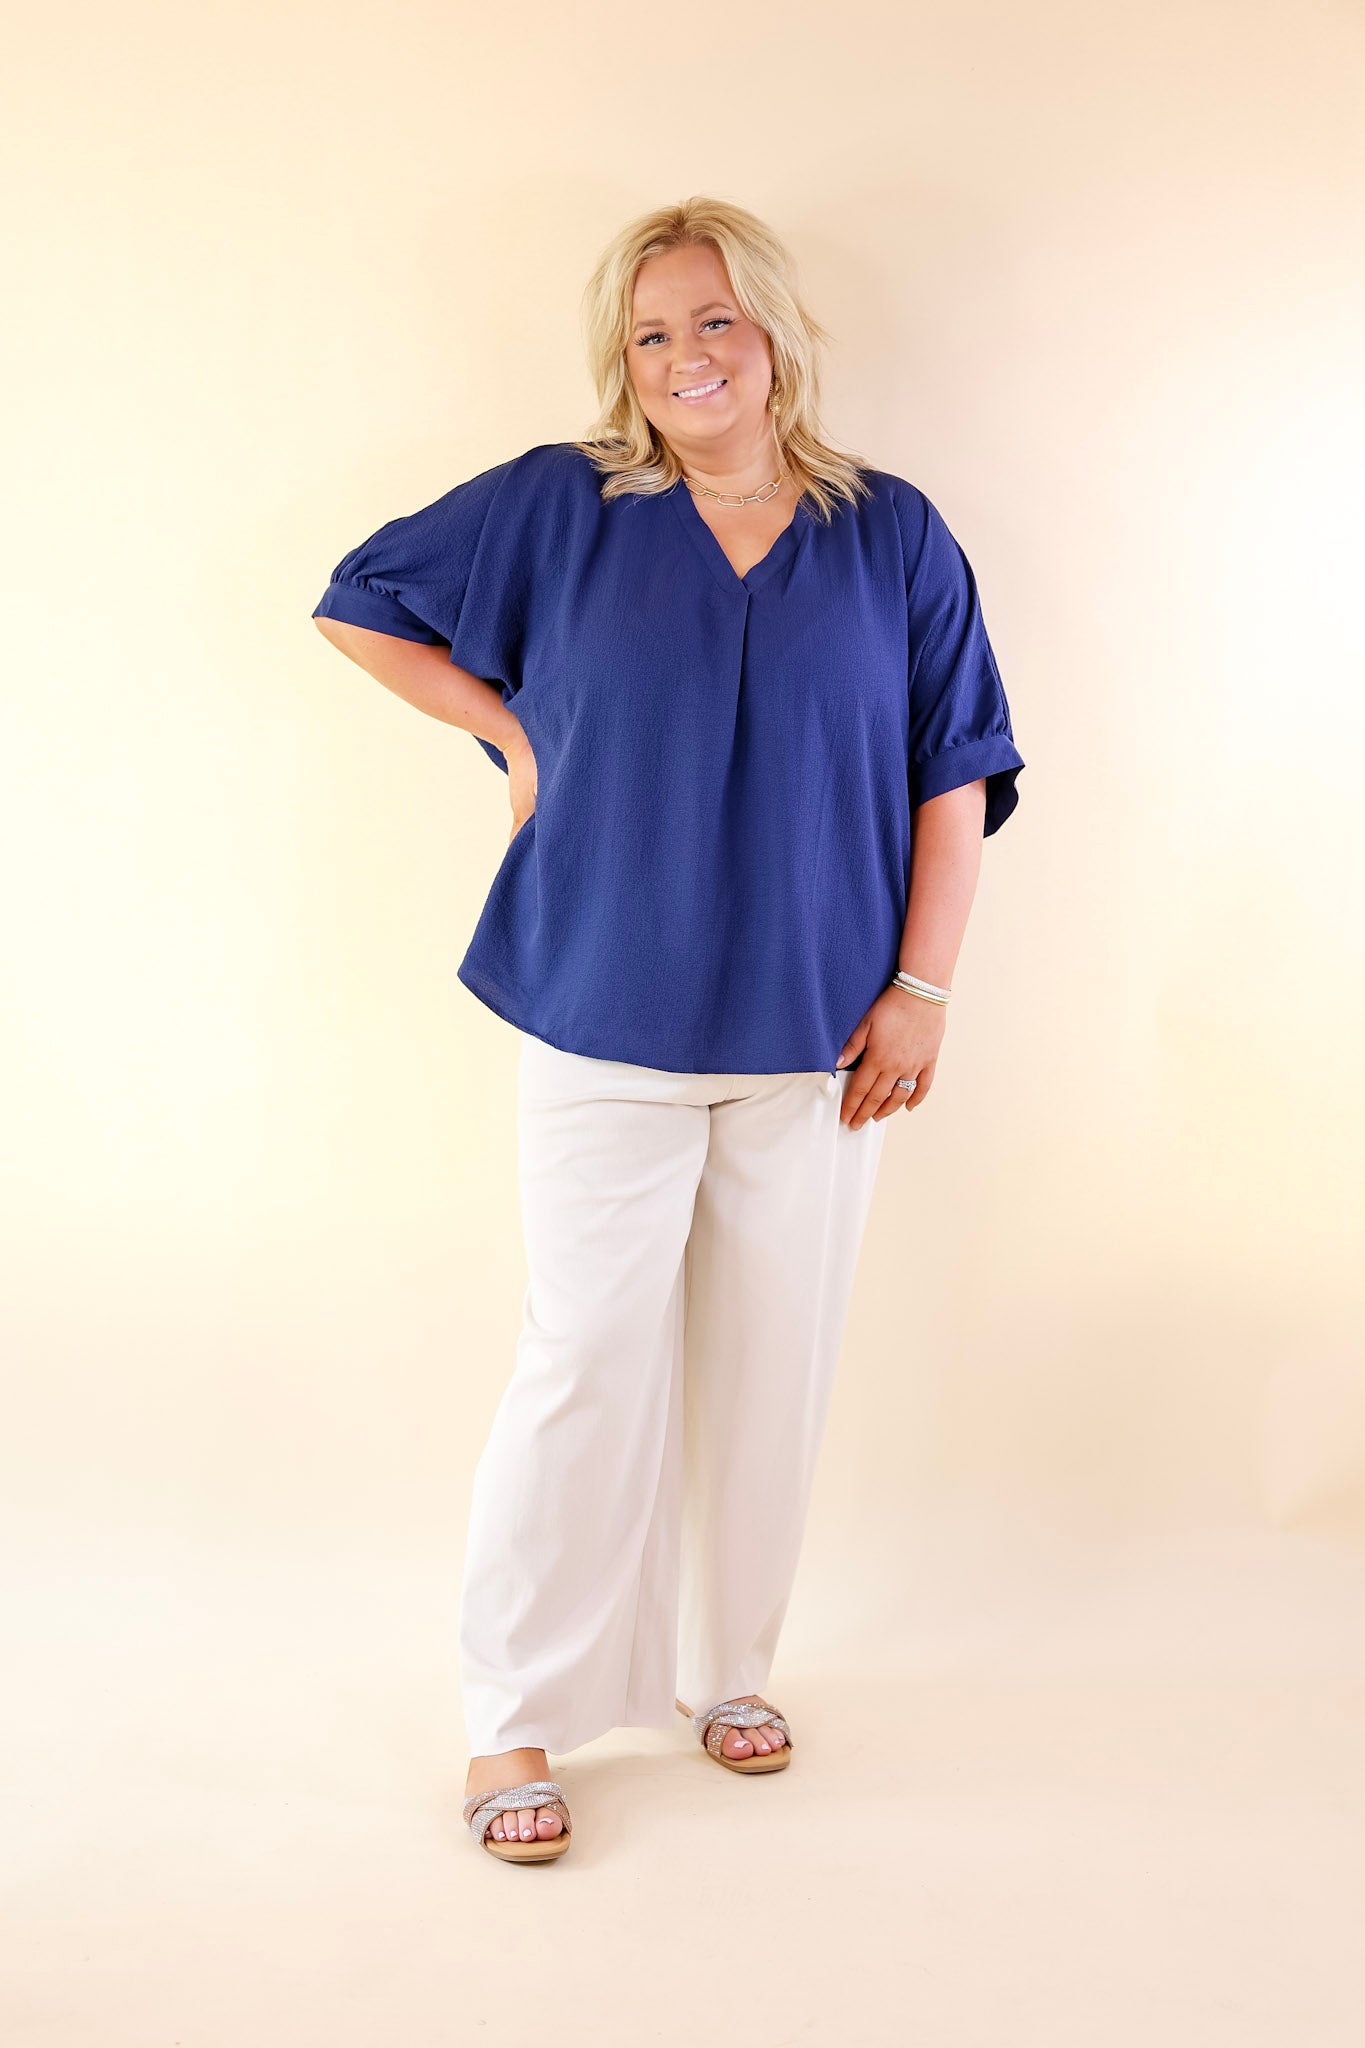 Chic and Charming V Neck Top with 3/4 Sleeves in Navy Blue - Giddy Up Glamour Boutique